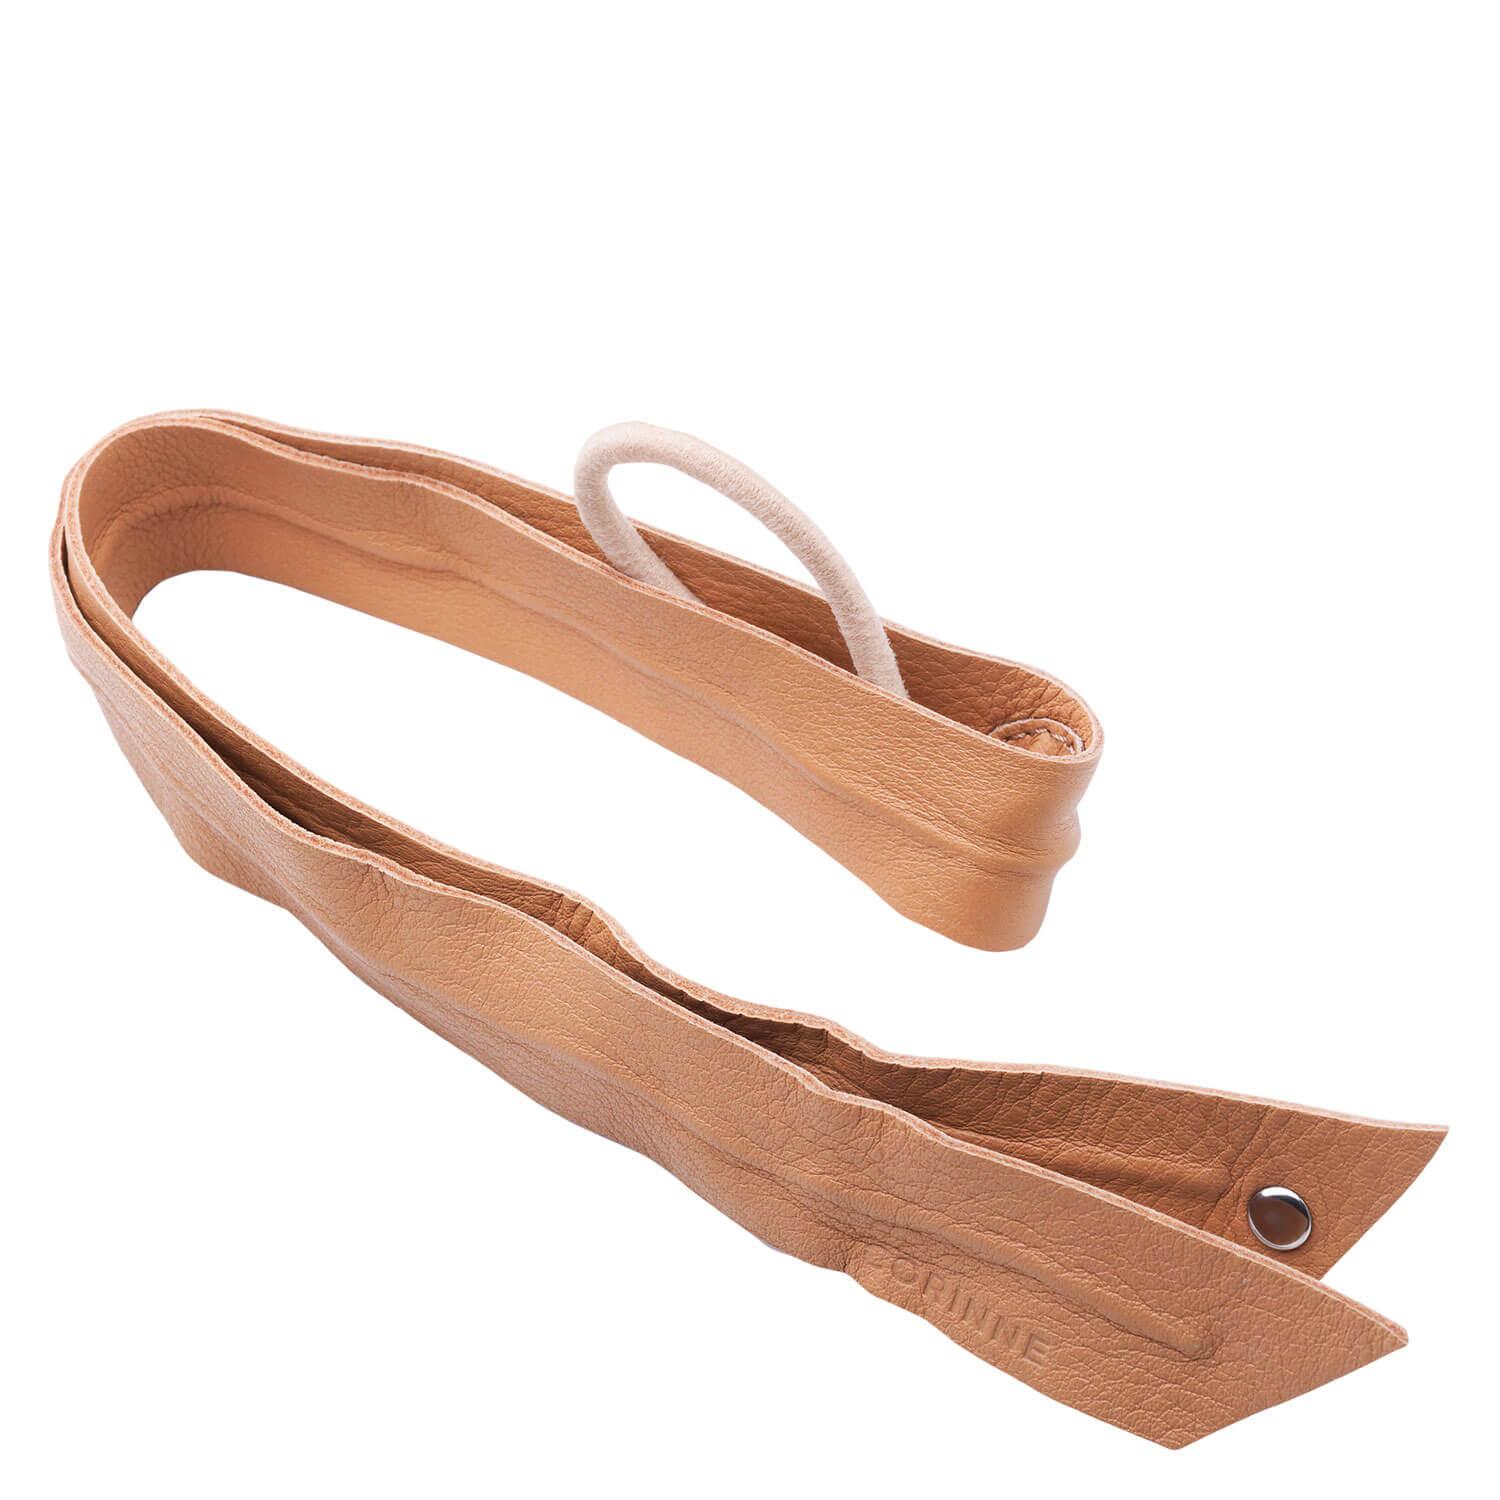 Corinne World - Leather Band Long Bendable Camel